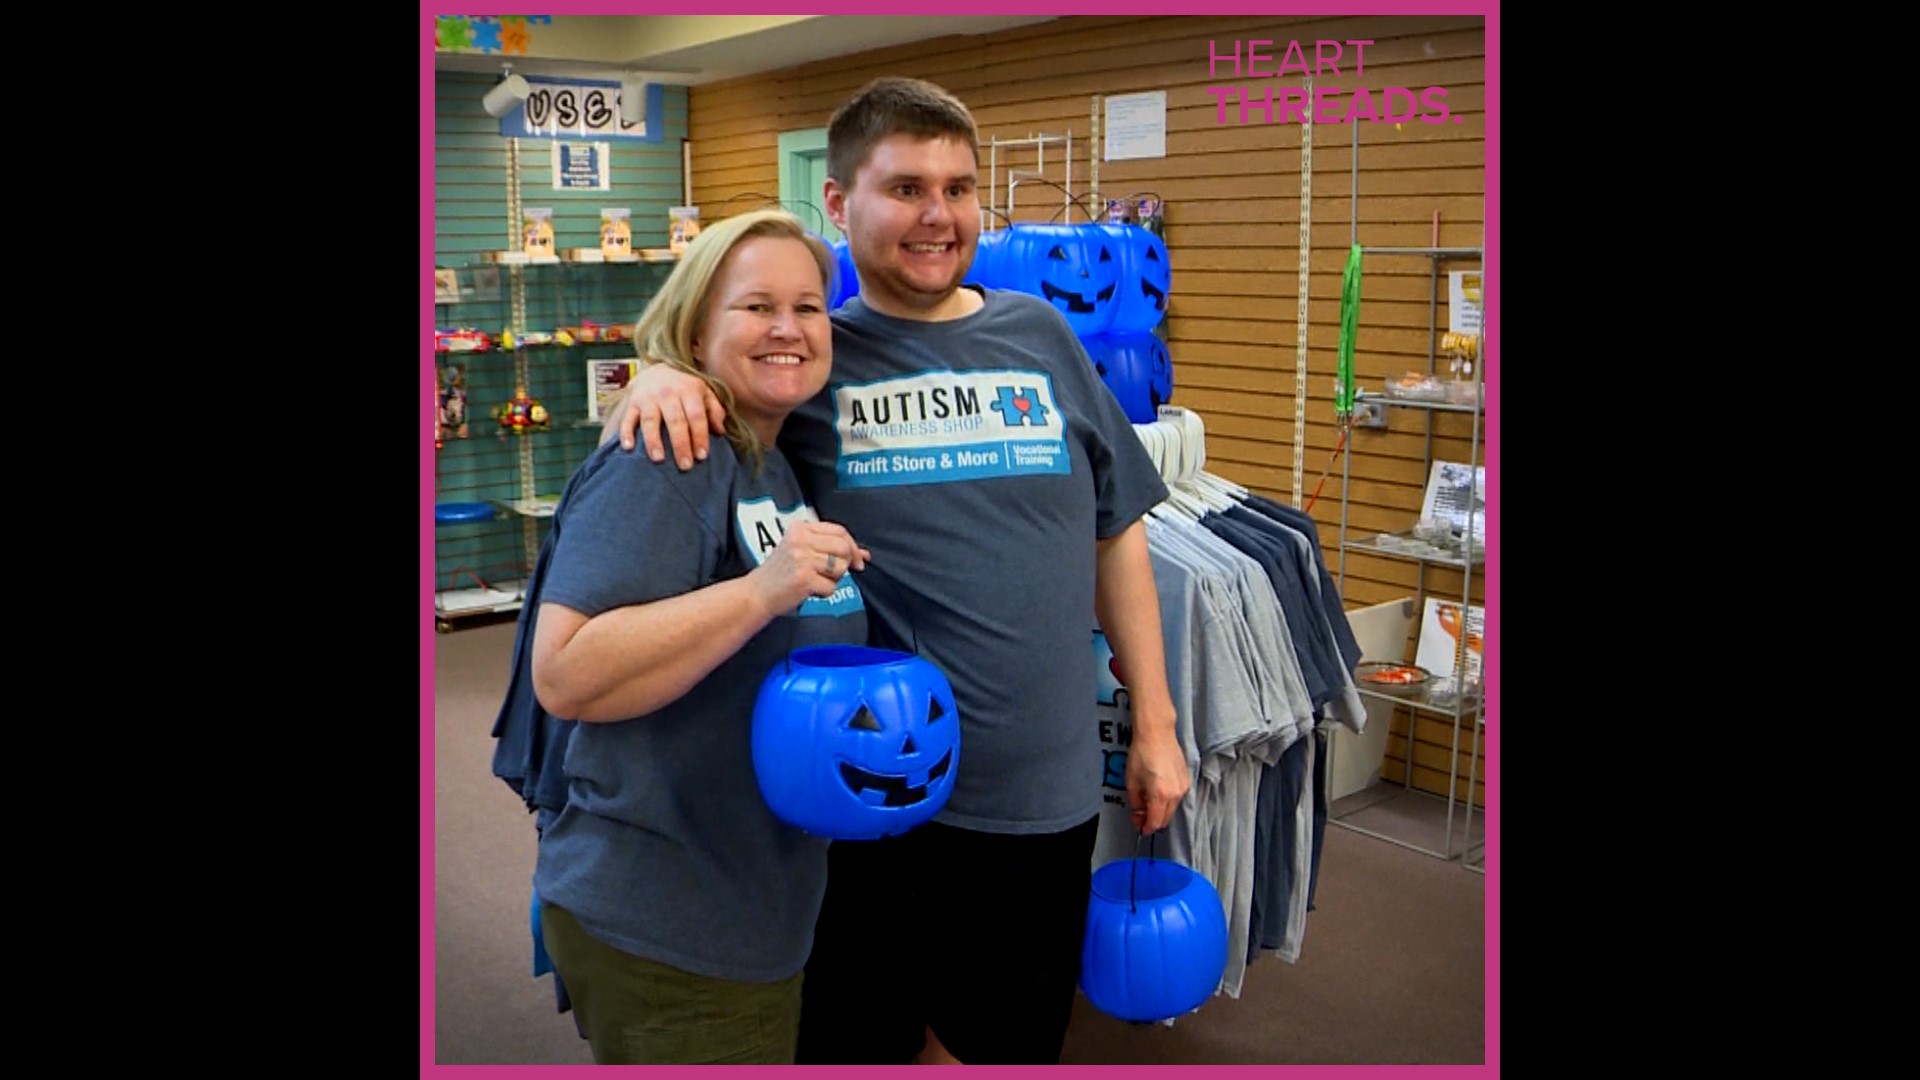 Jenifer and Cody want everyone to know that trick-or-treaters with blue pumpkins this Halloween might be autistic and need a little extra compassion and patience.